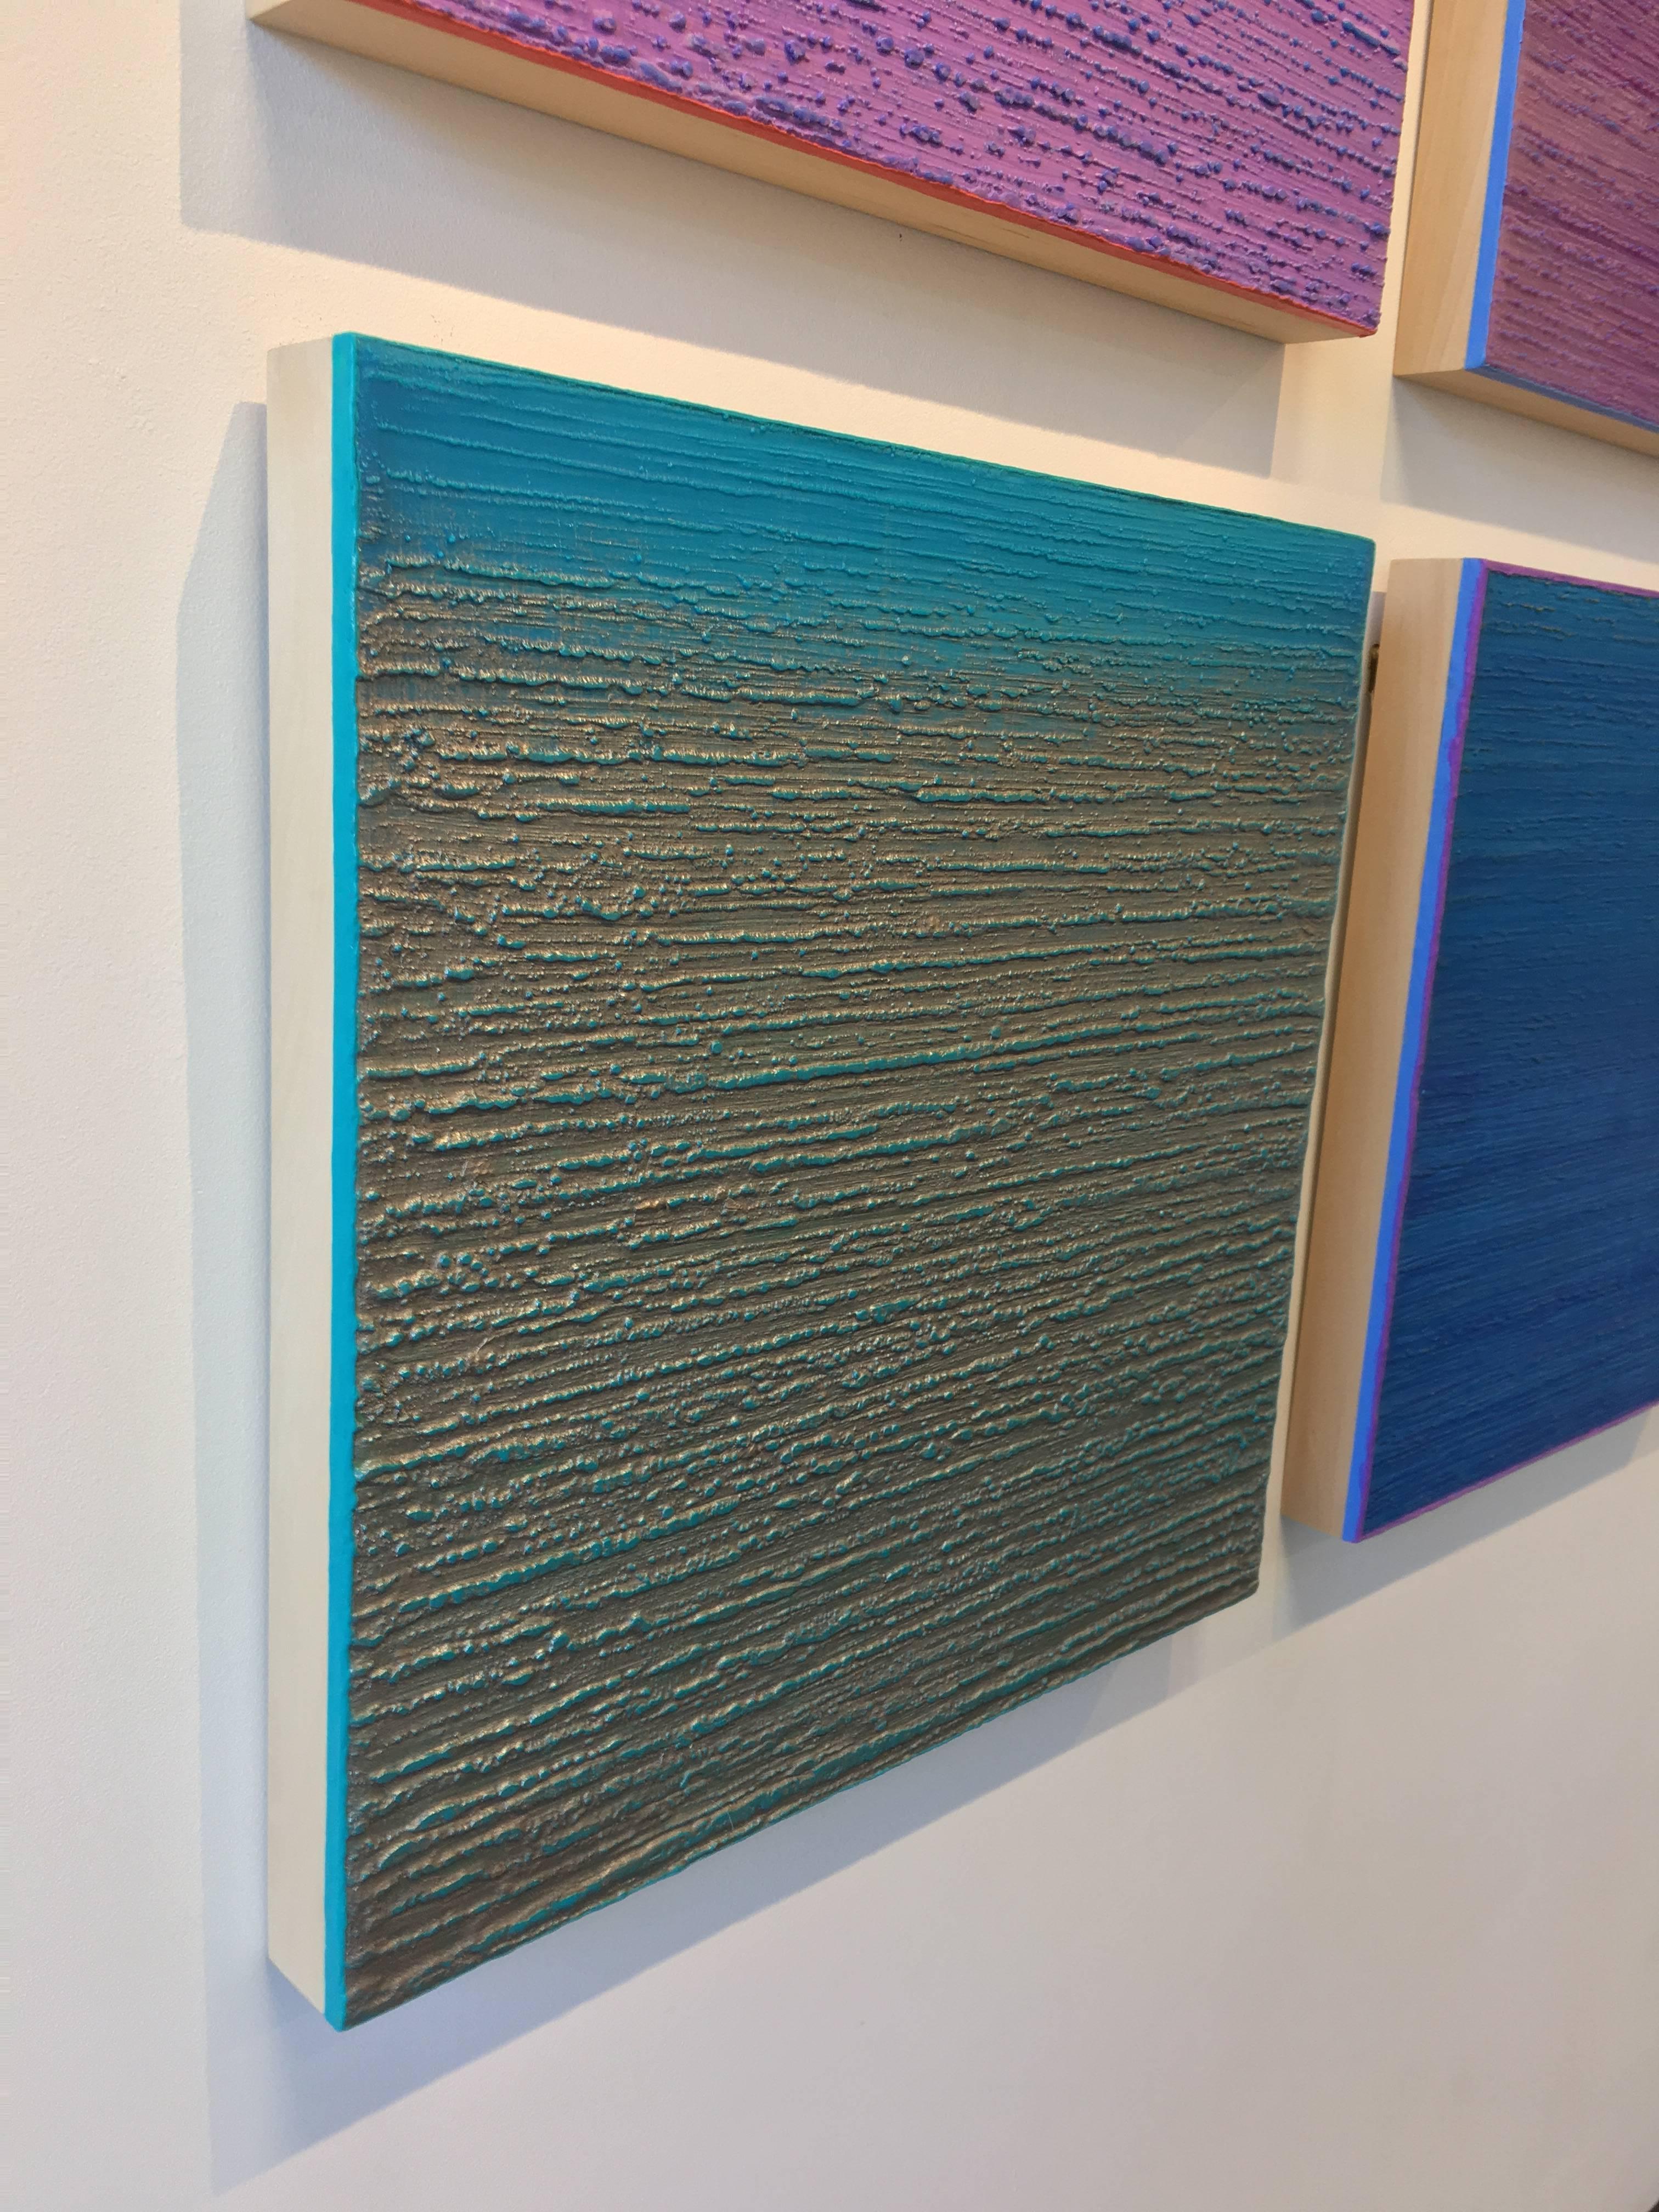 Silk Road 415, Metallic Silver, Bright Blue Square Encaustic Color Field - Contemporary Painting by Joanne Mattera